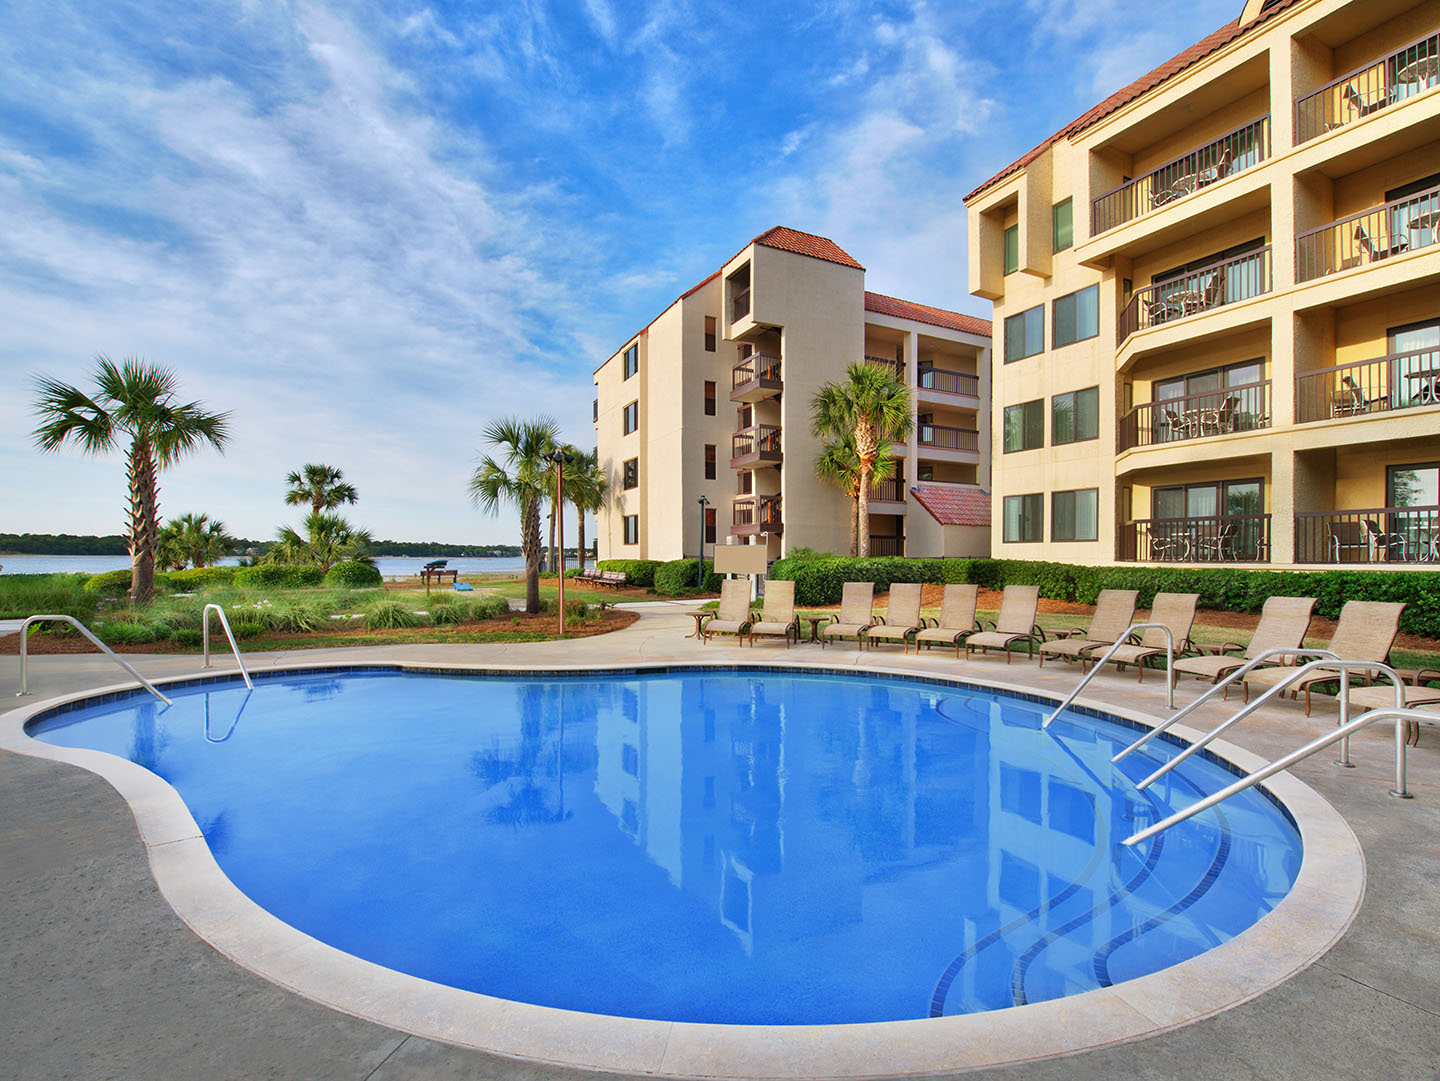 Marriott's Sunset Pointe Pool. Marriott's Sunset Pointe is located in Hilton Head Island, South Carolina United States.